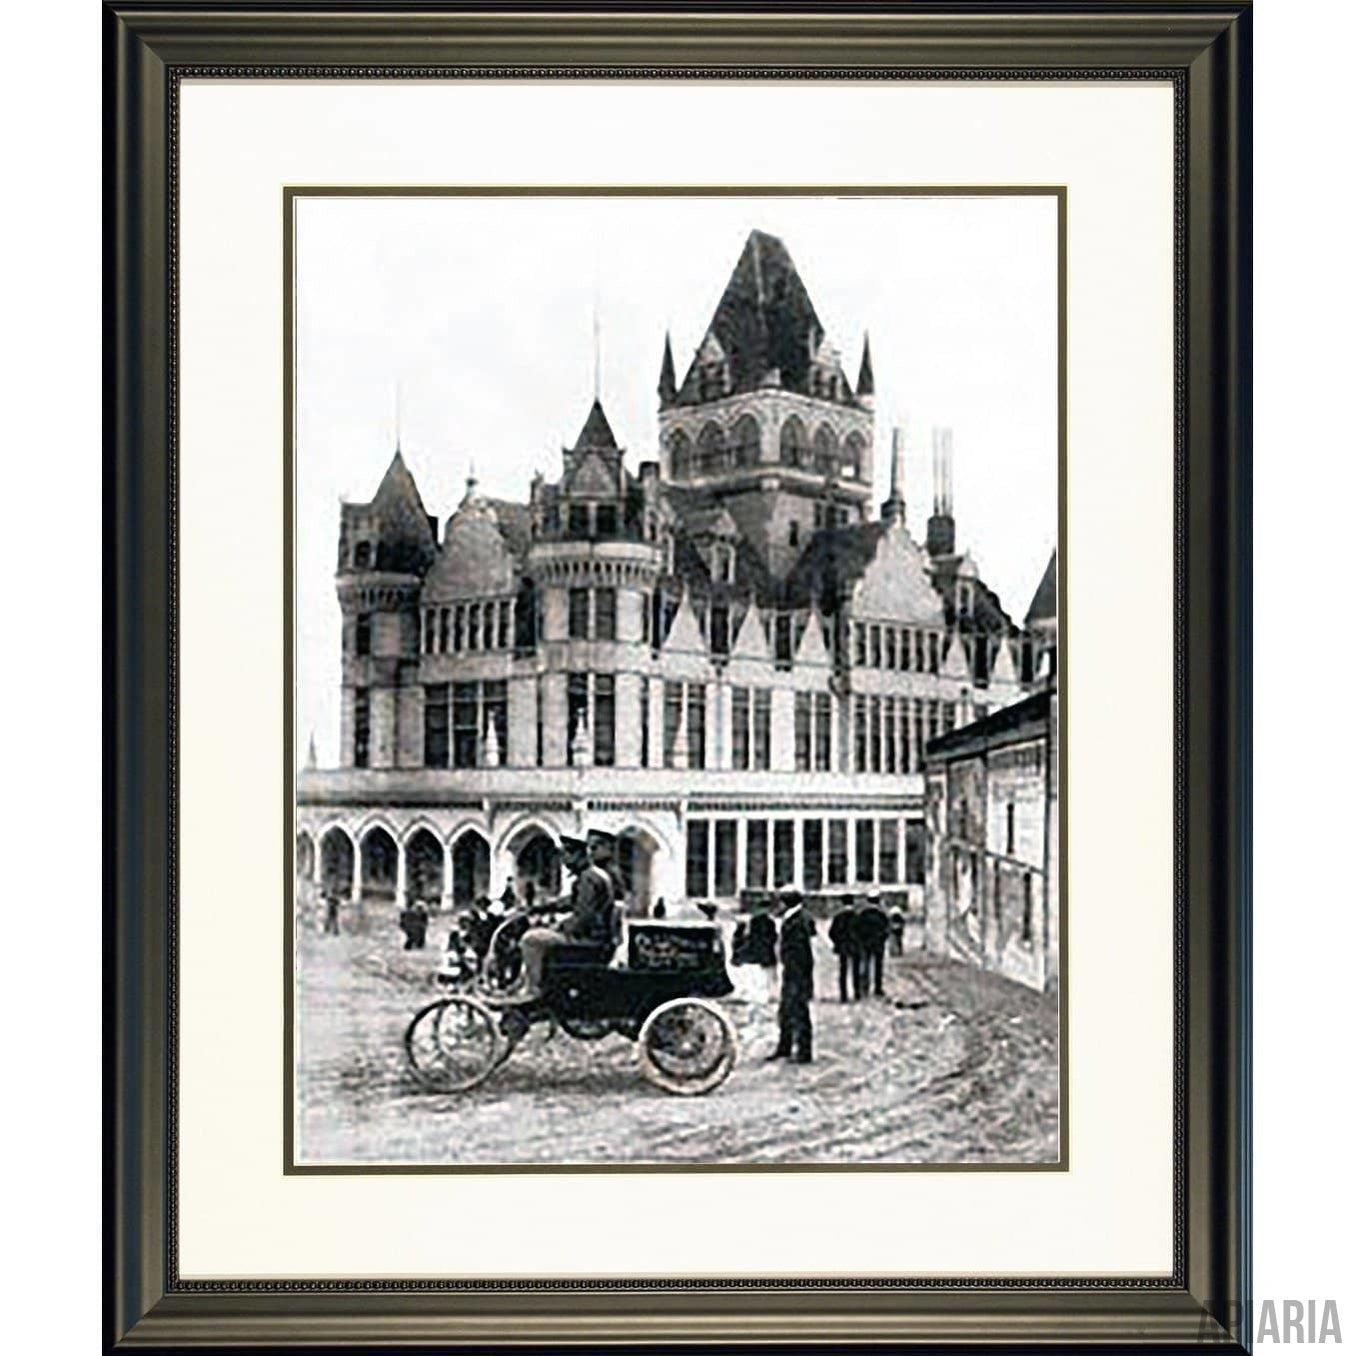 Oldsmobile at the Cliff House, c. 1907-Framed Item-Apiaria